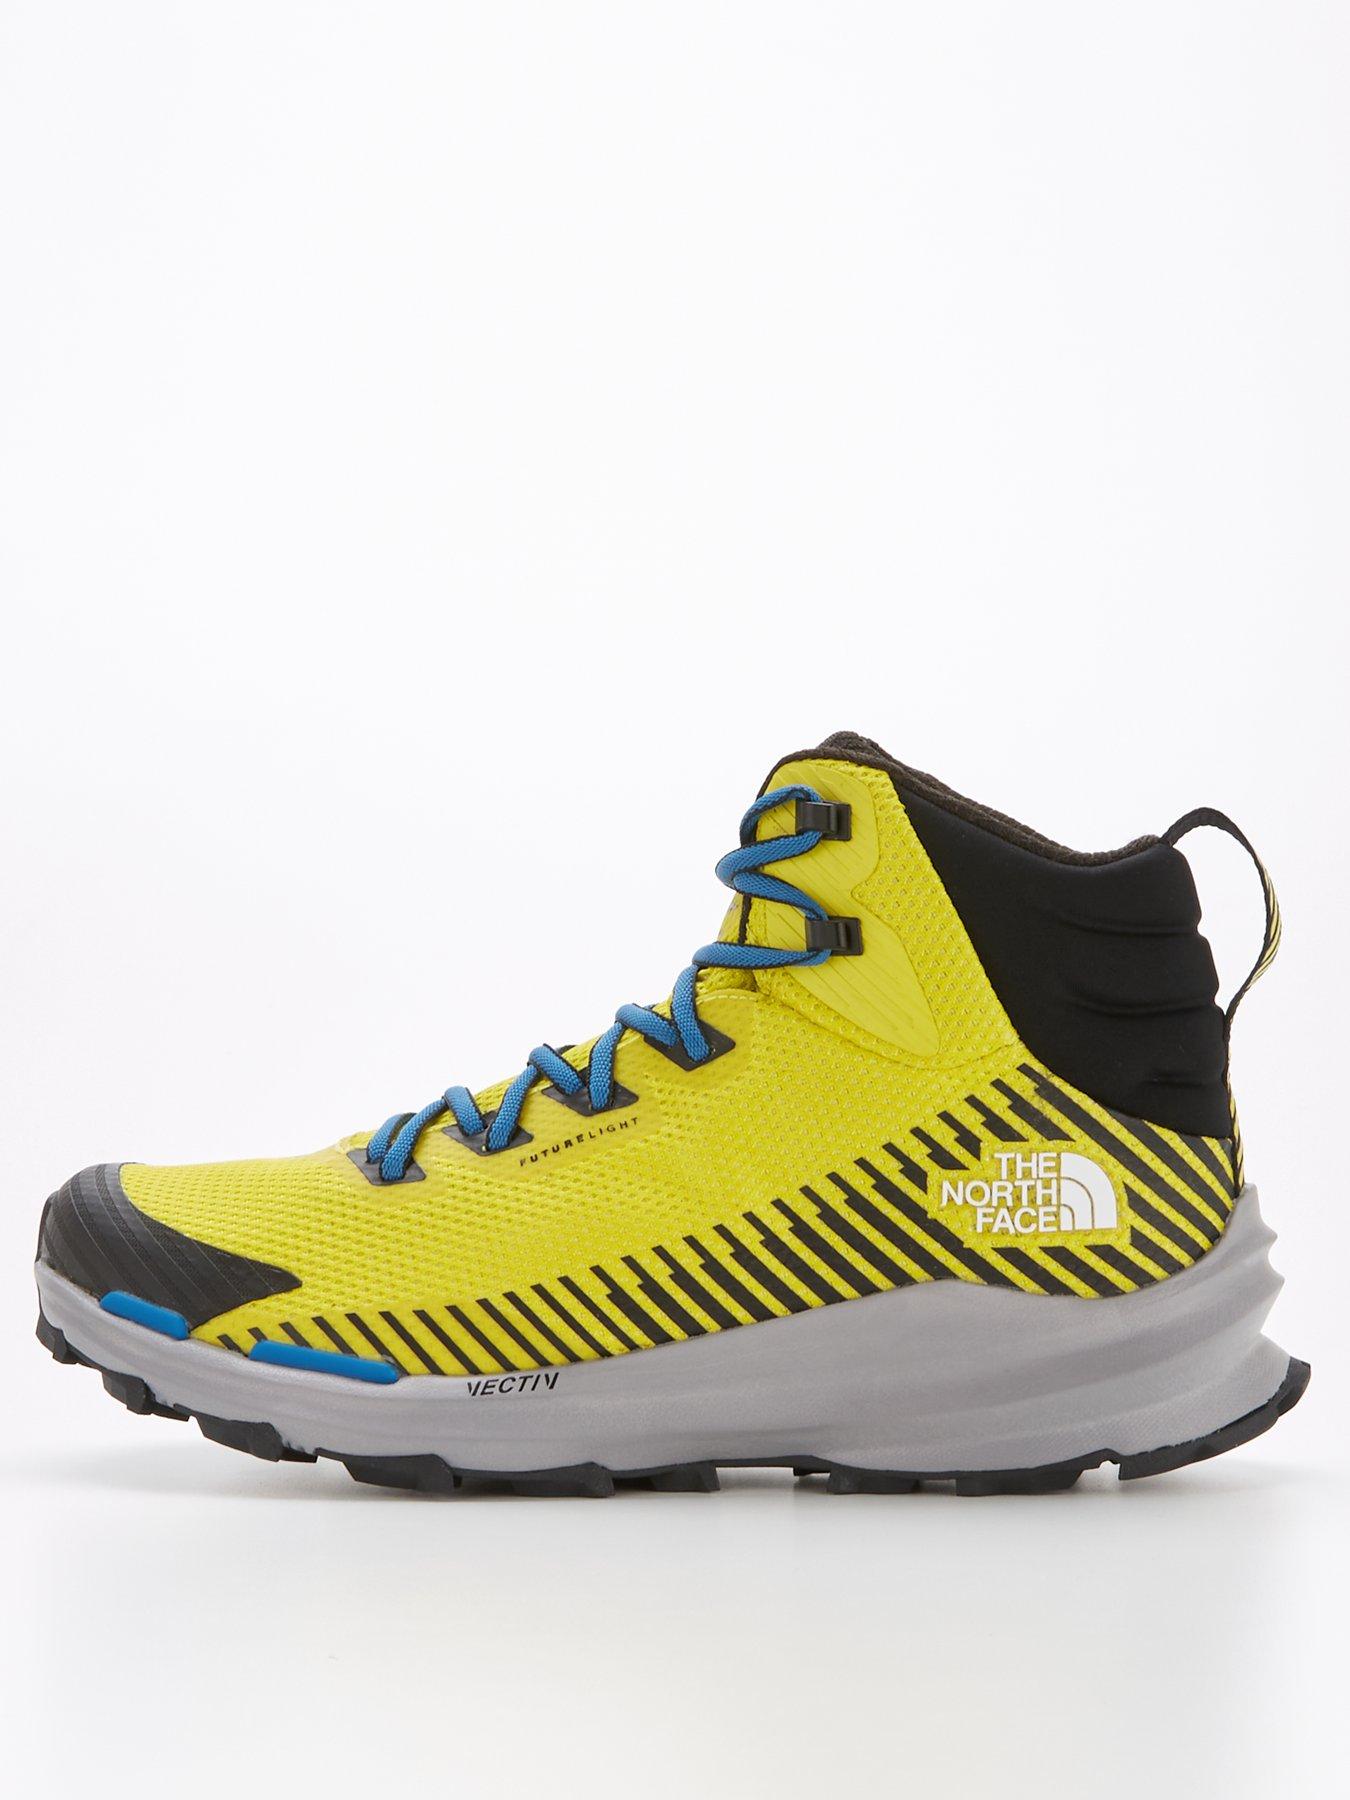 THE NORTH FACE Vectiv™ Fastpack Mid Futurelight™ - Yellow/Black | very ...